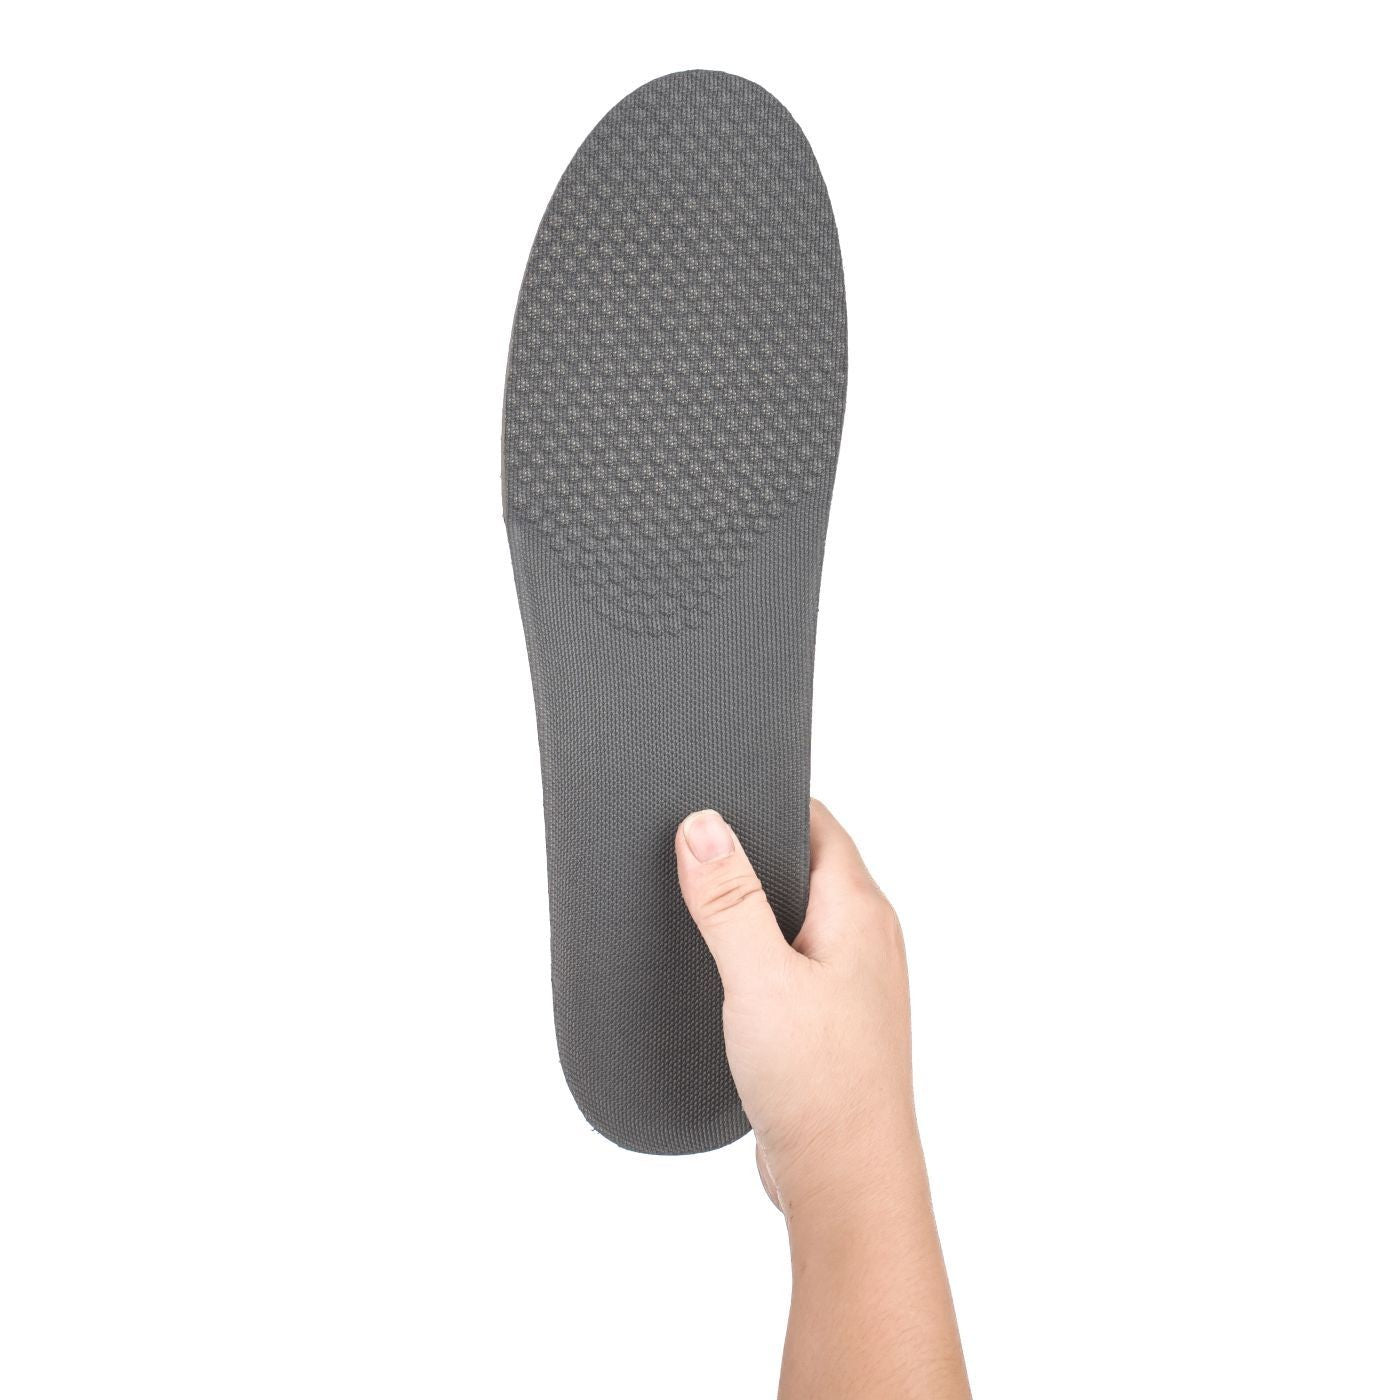 Elevator shoes height increase IK304 - Men Mid Sole Arch Support Massaging Height Increase Insoles - 2 CM | 0.8 INCH Taller